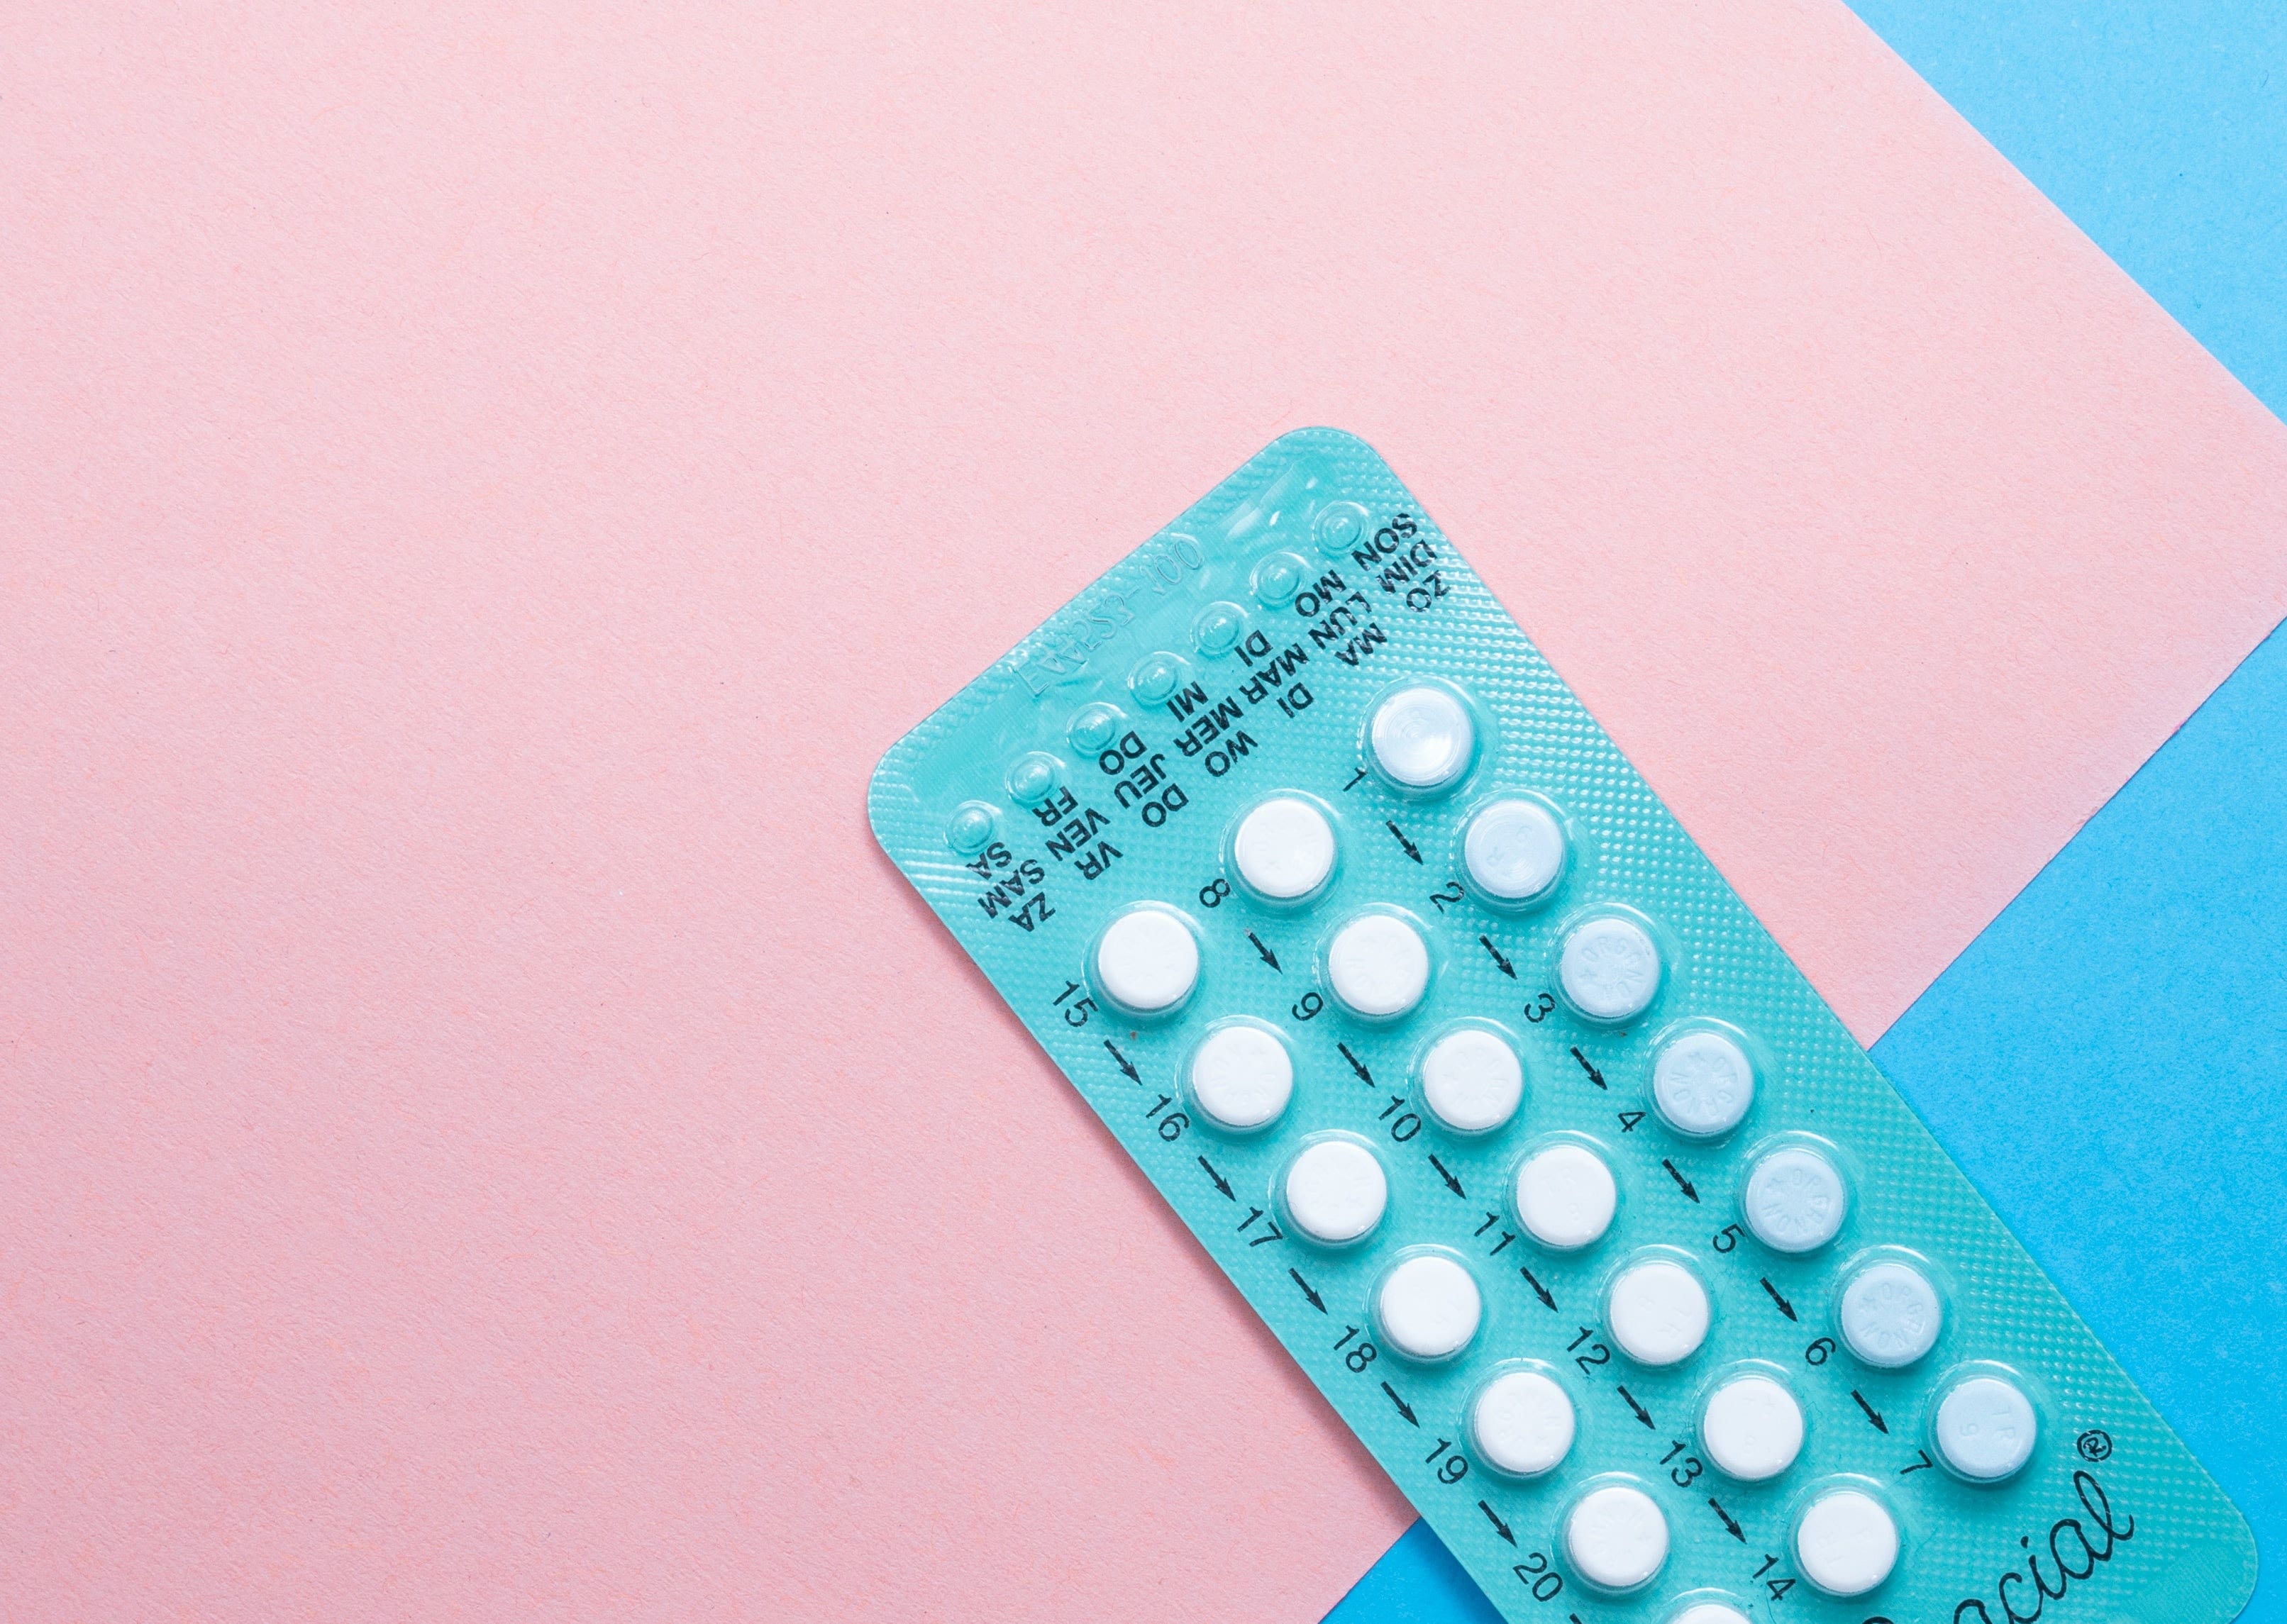 This $5B Pharmaceutical Could Benefit From Over-The-Counter Contraceptives And Plan B Alternatives